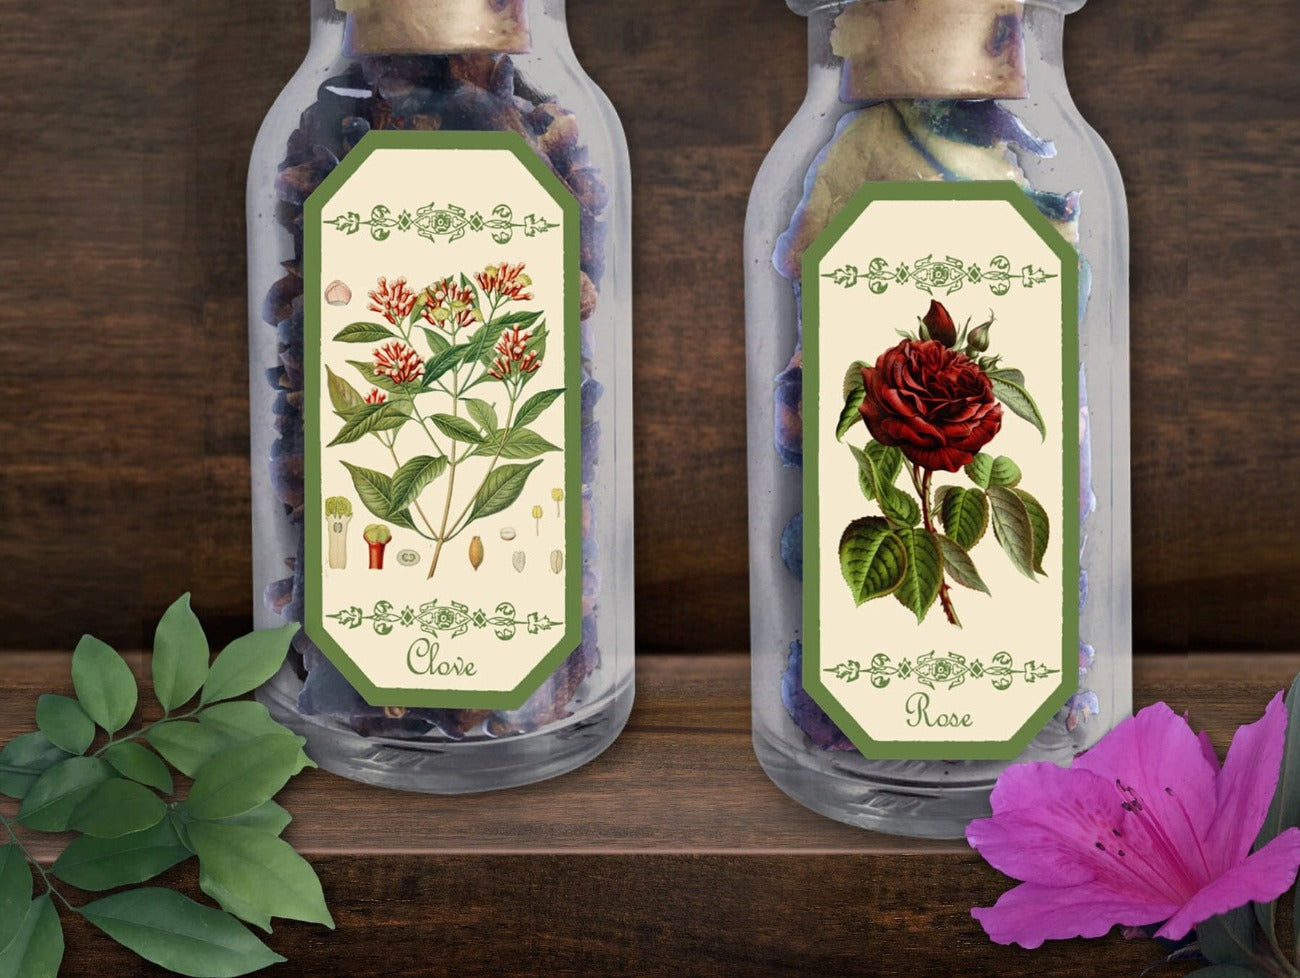 2 HERBAL APOTHECARY LABELS Placed on small jars filled with herbs with corked lids - Morgana Magick Spell